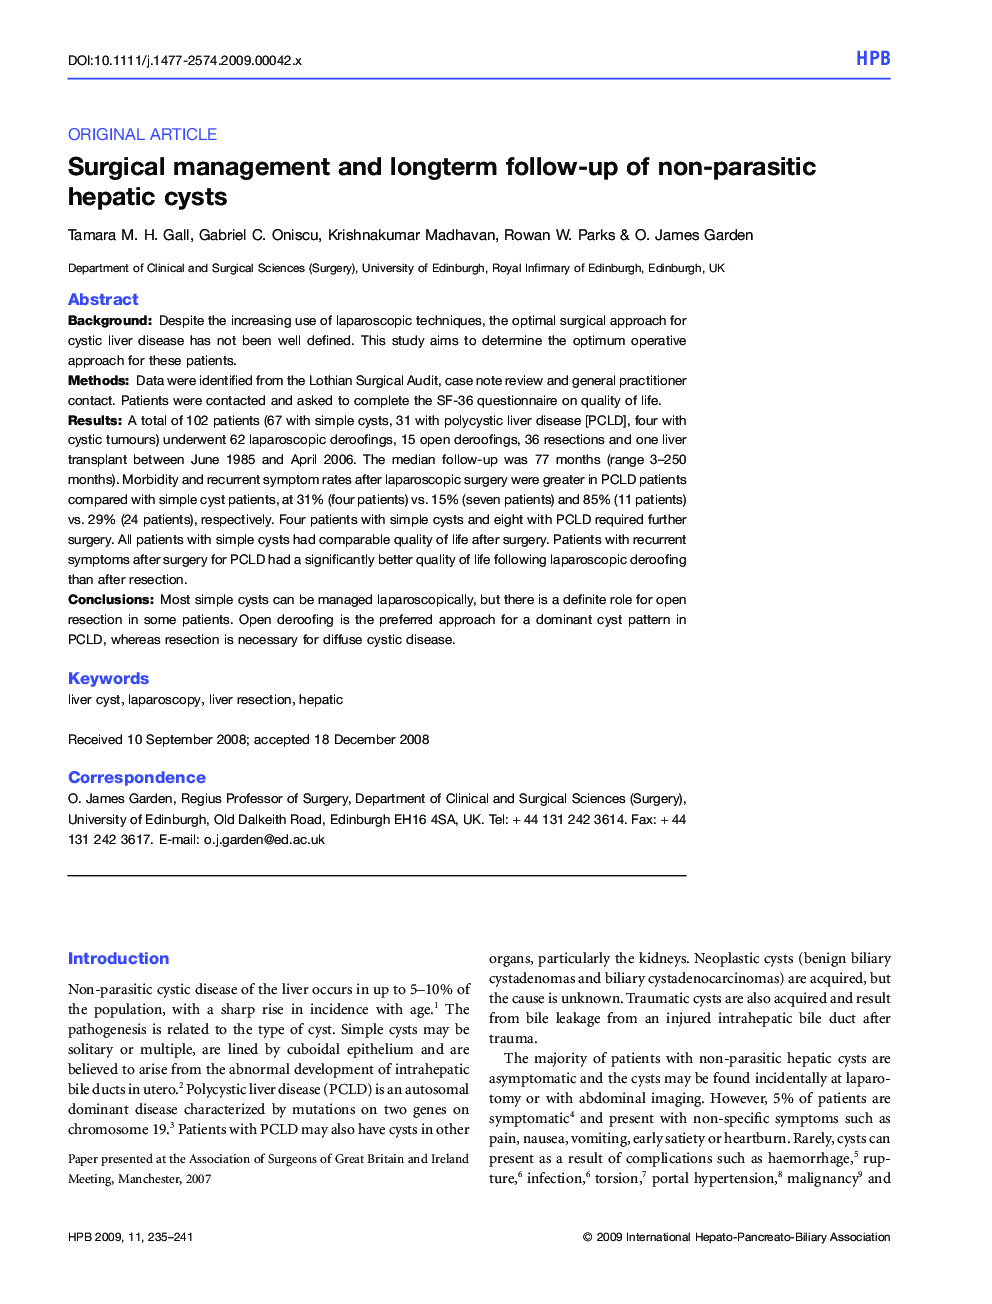 Surgical management and longterm follow-up of non-parasitic hepatic cysts